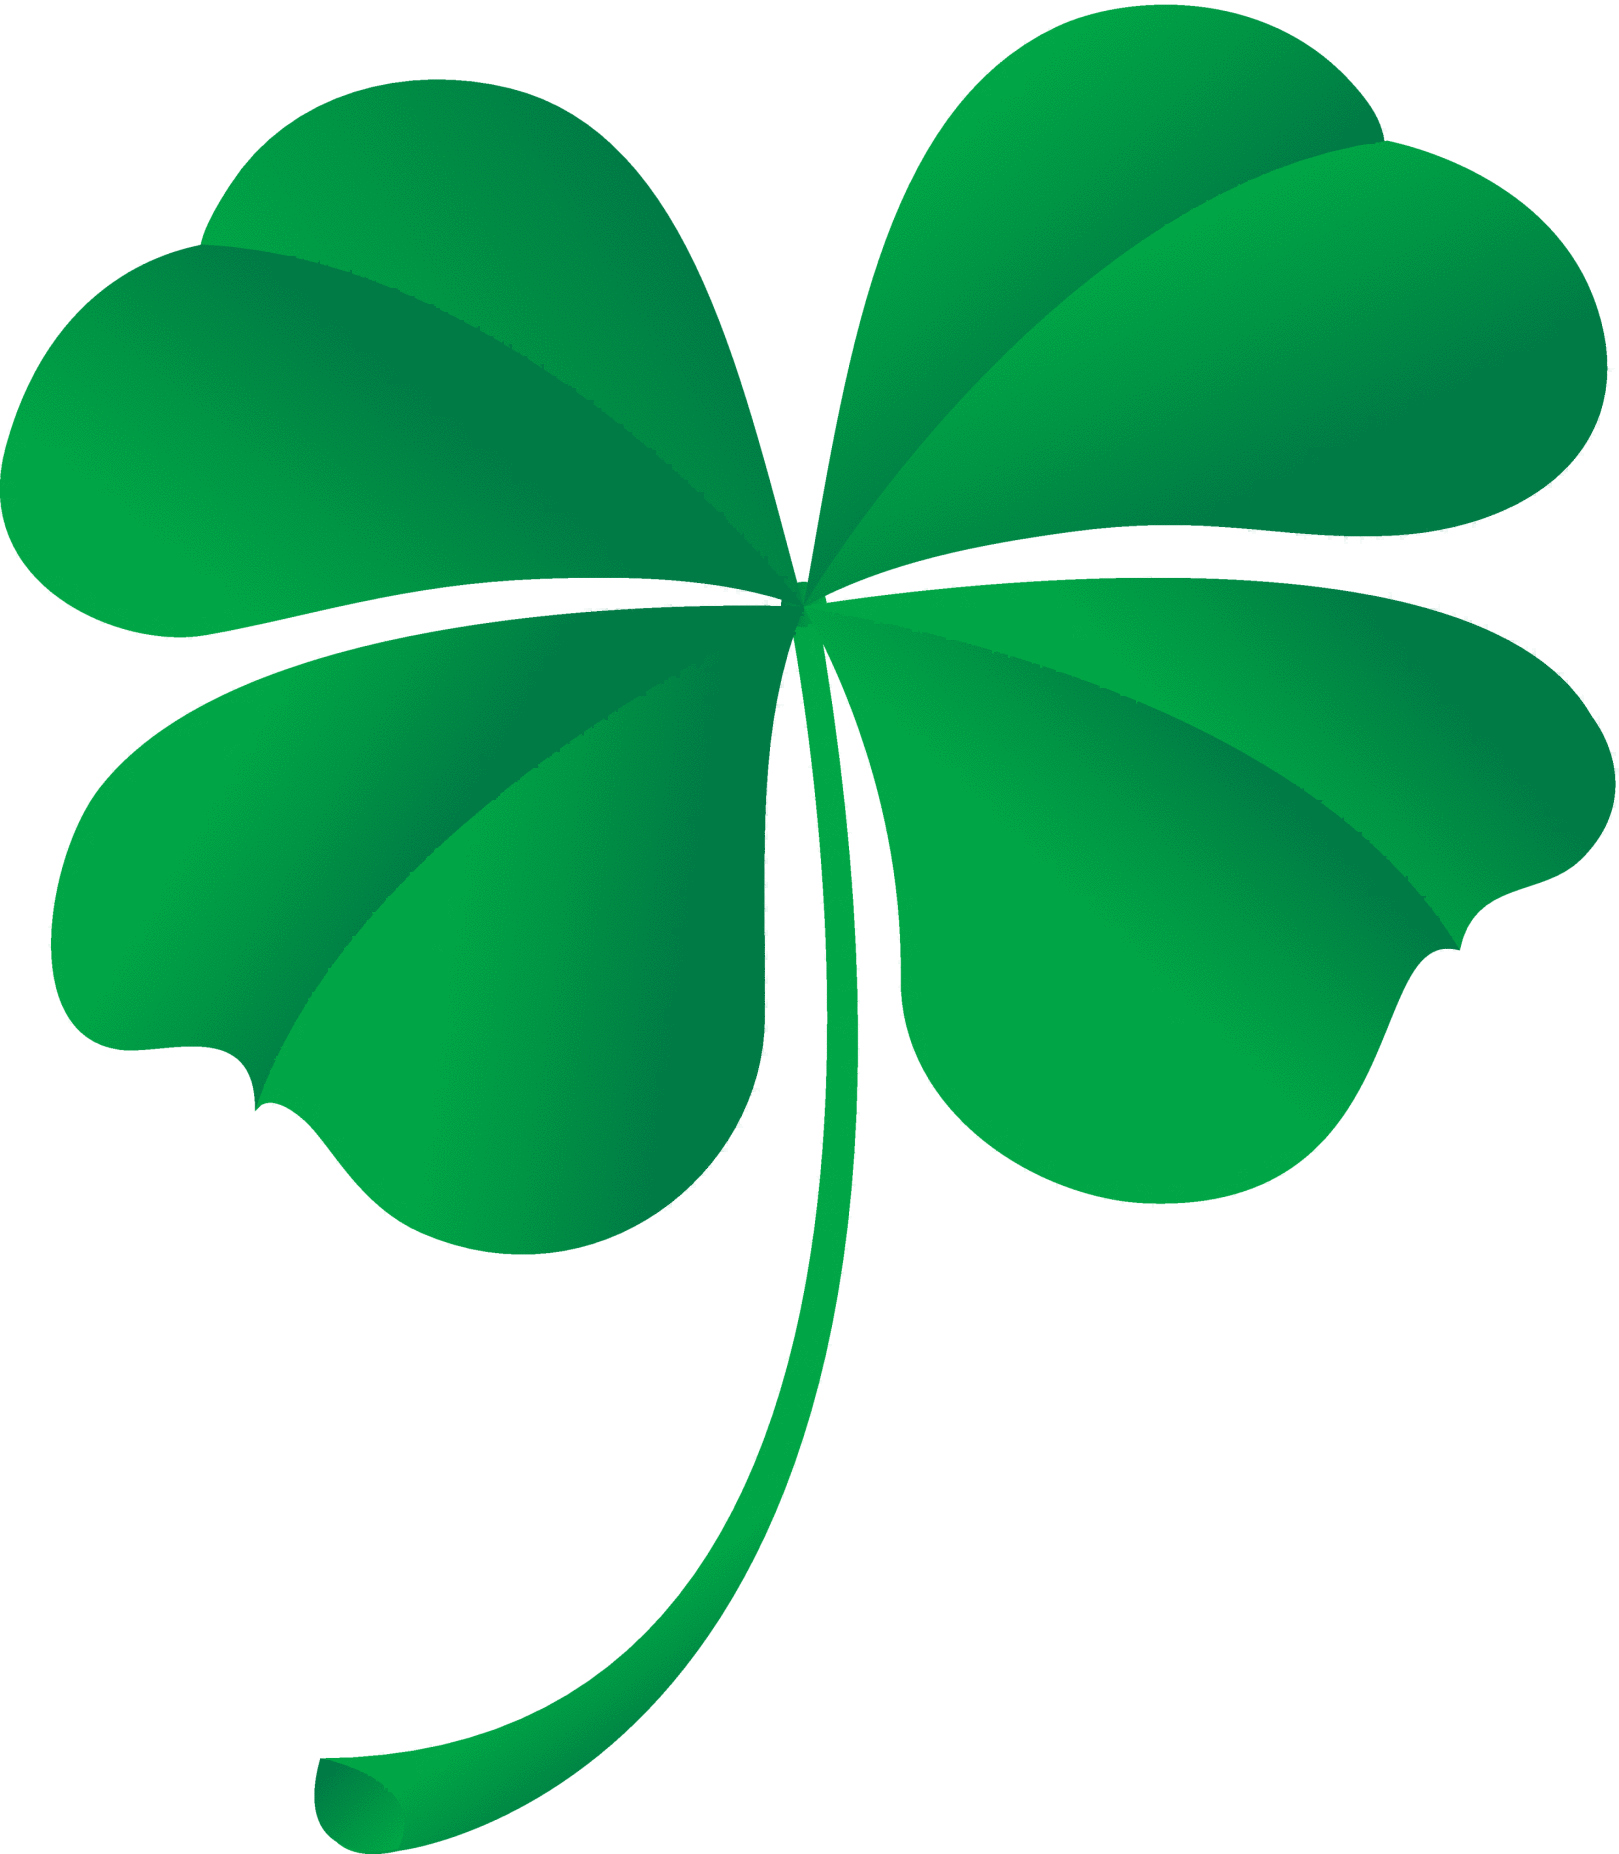 14 Clover Template Free Cliparts That You Can Download To You Computer